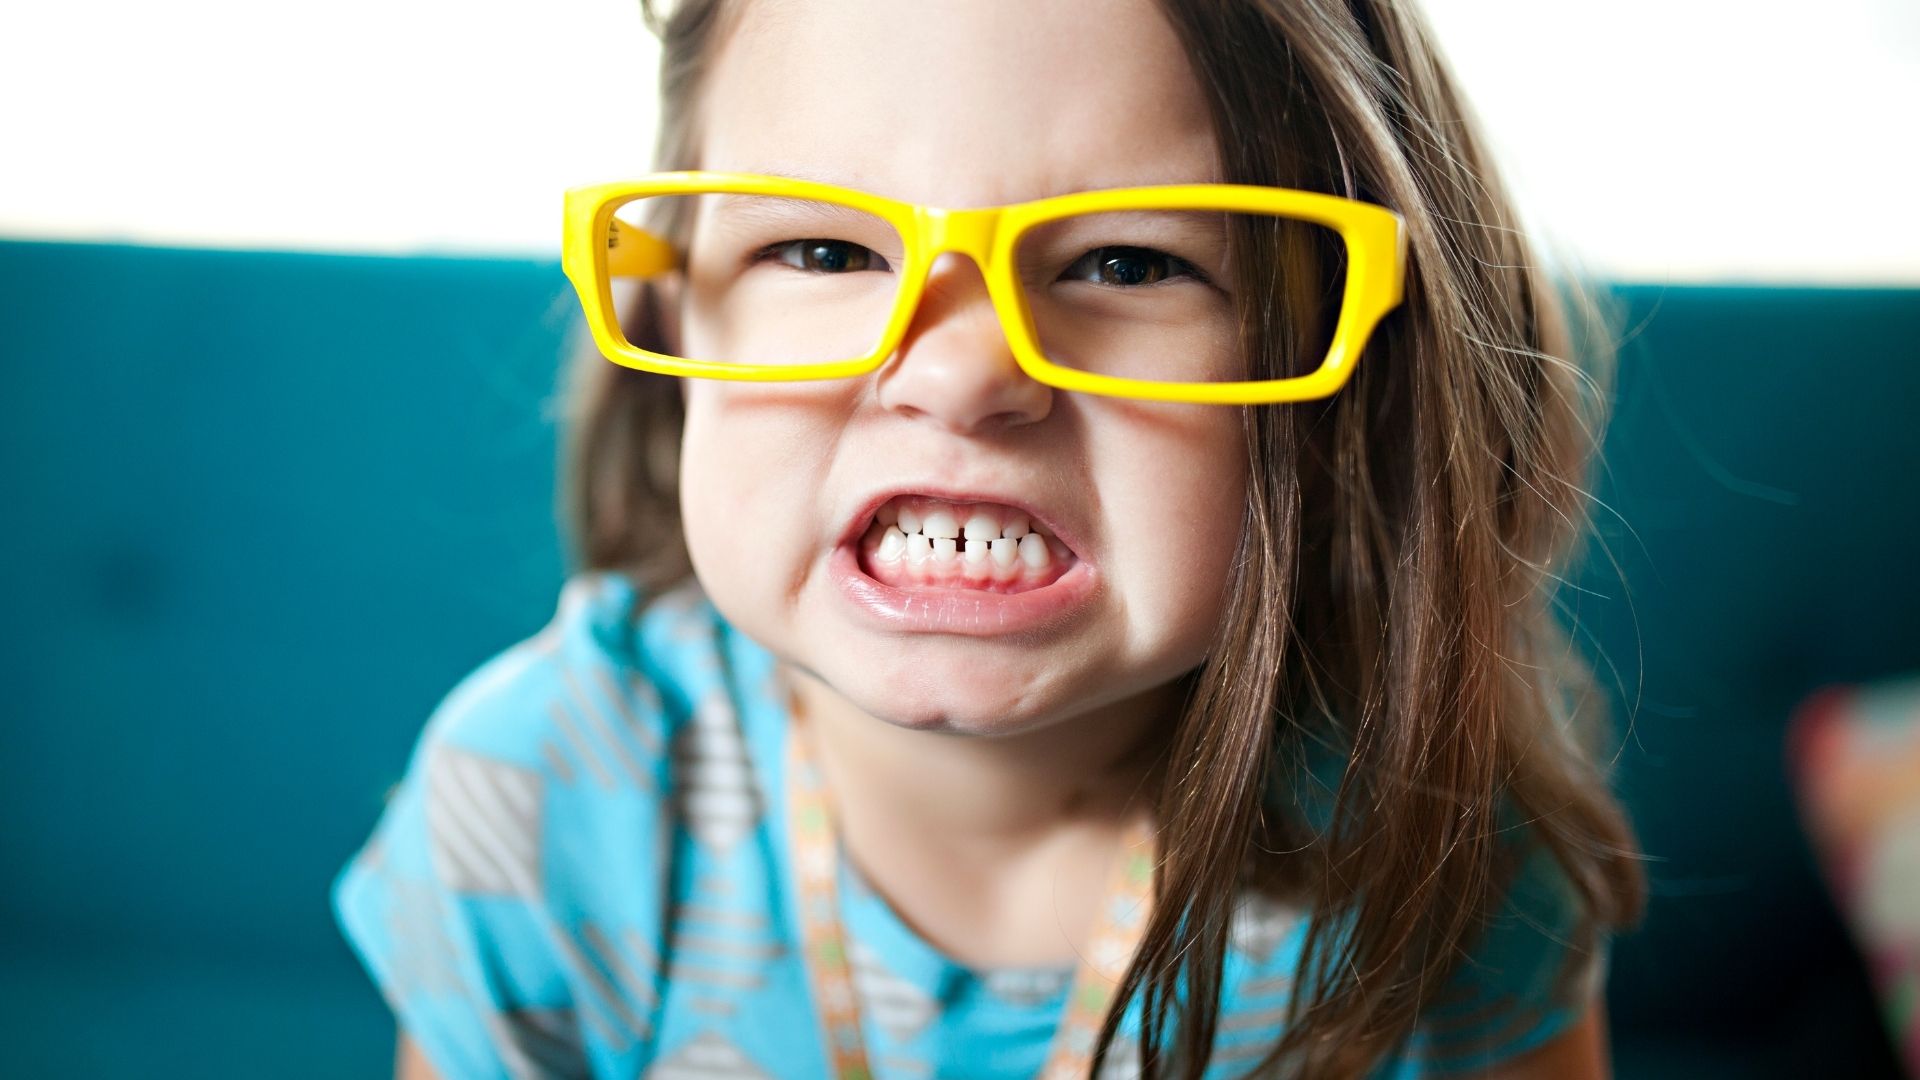 Why your child should say "I'm angry"